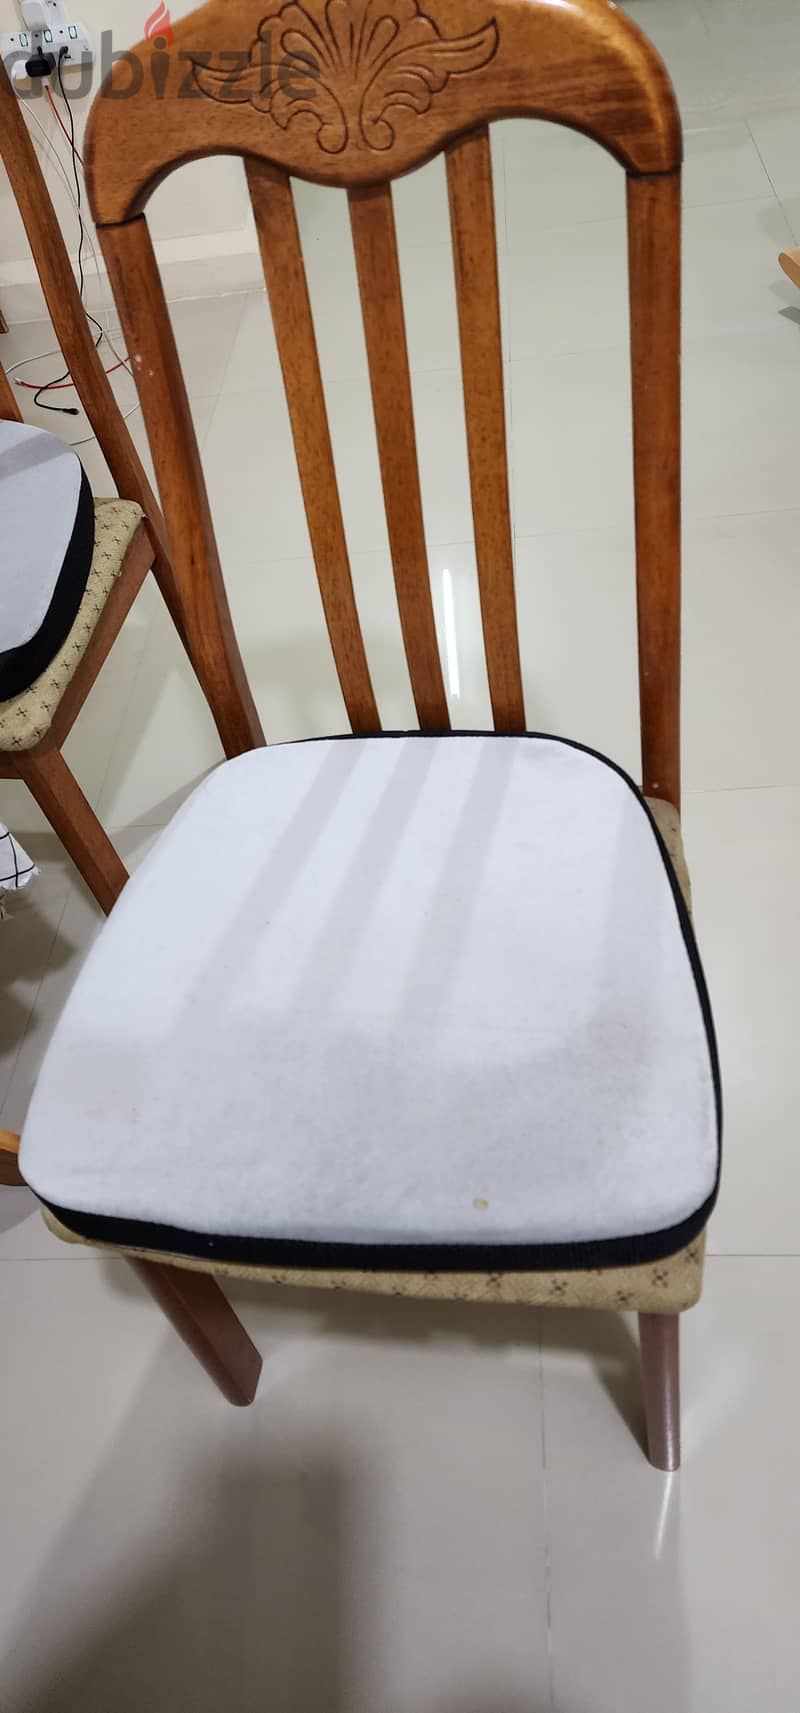 Dining table with Chairs, Good condition 4